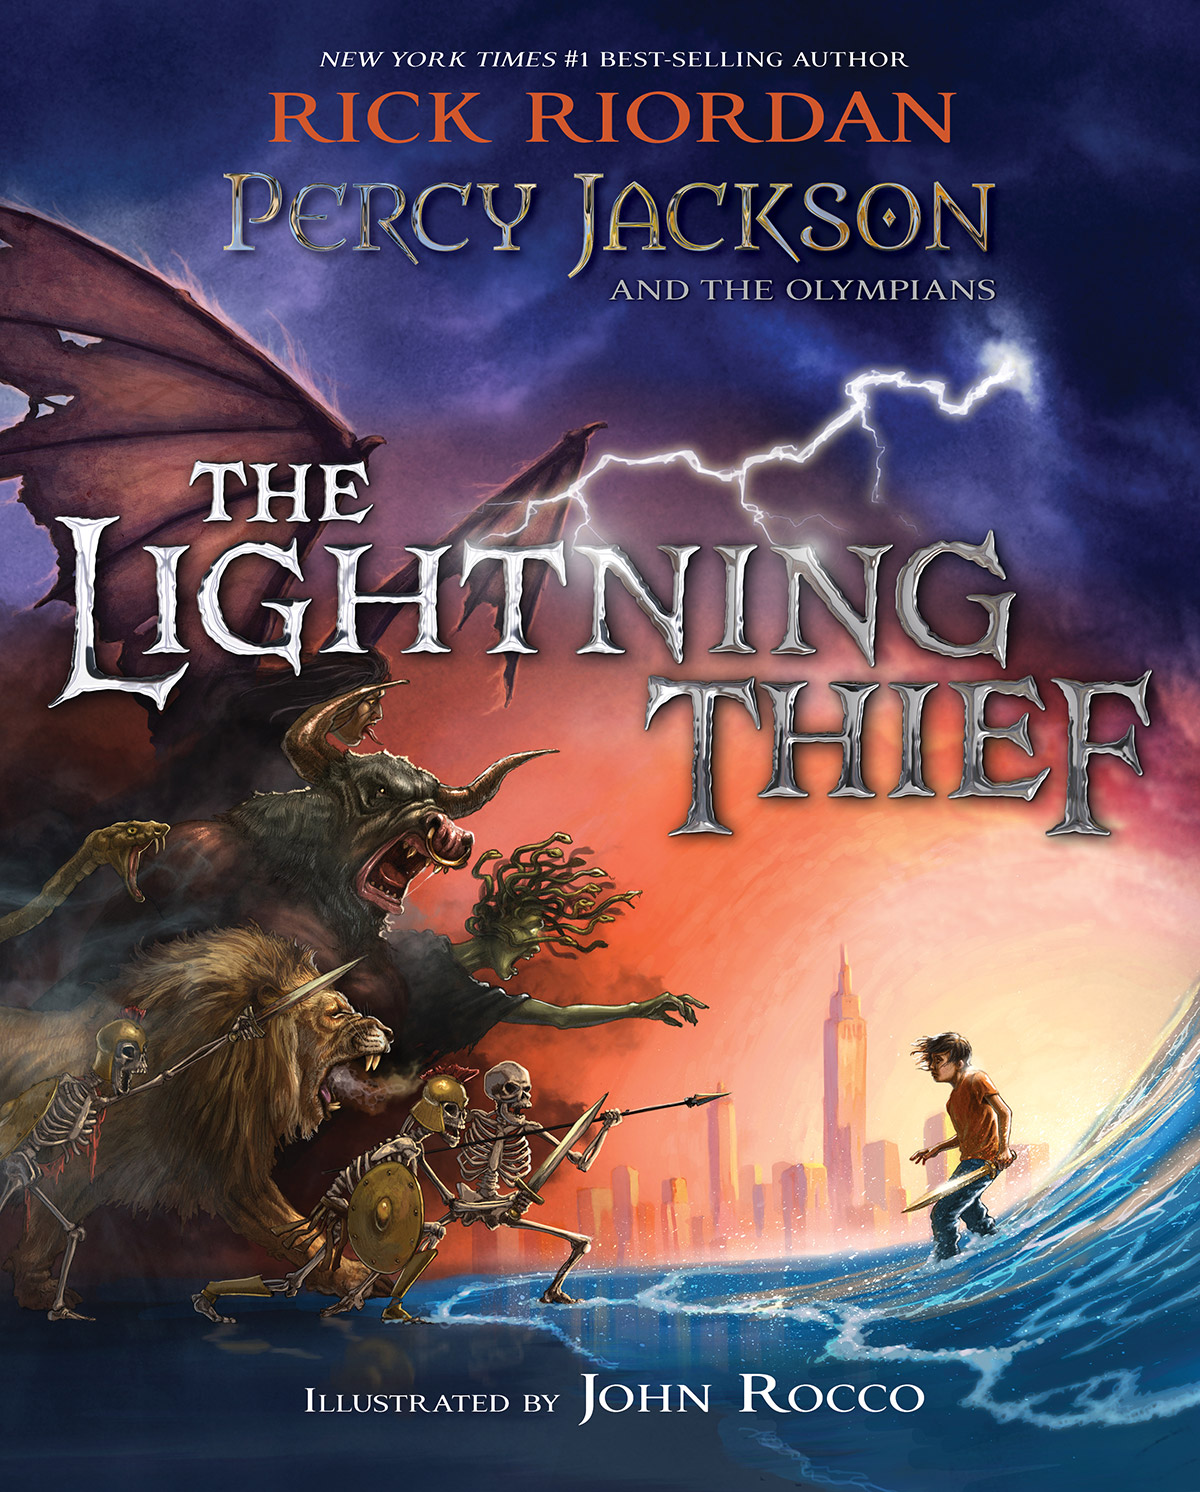 Percy Jackson and the Olympians: The Lightning Thief: Illustrated Edition  (Book 1), by Rick Riordan